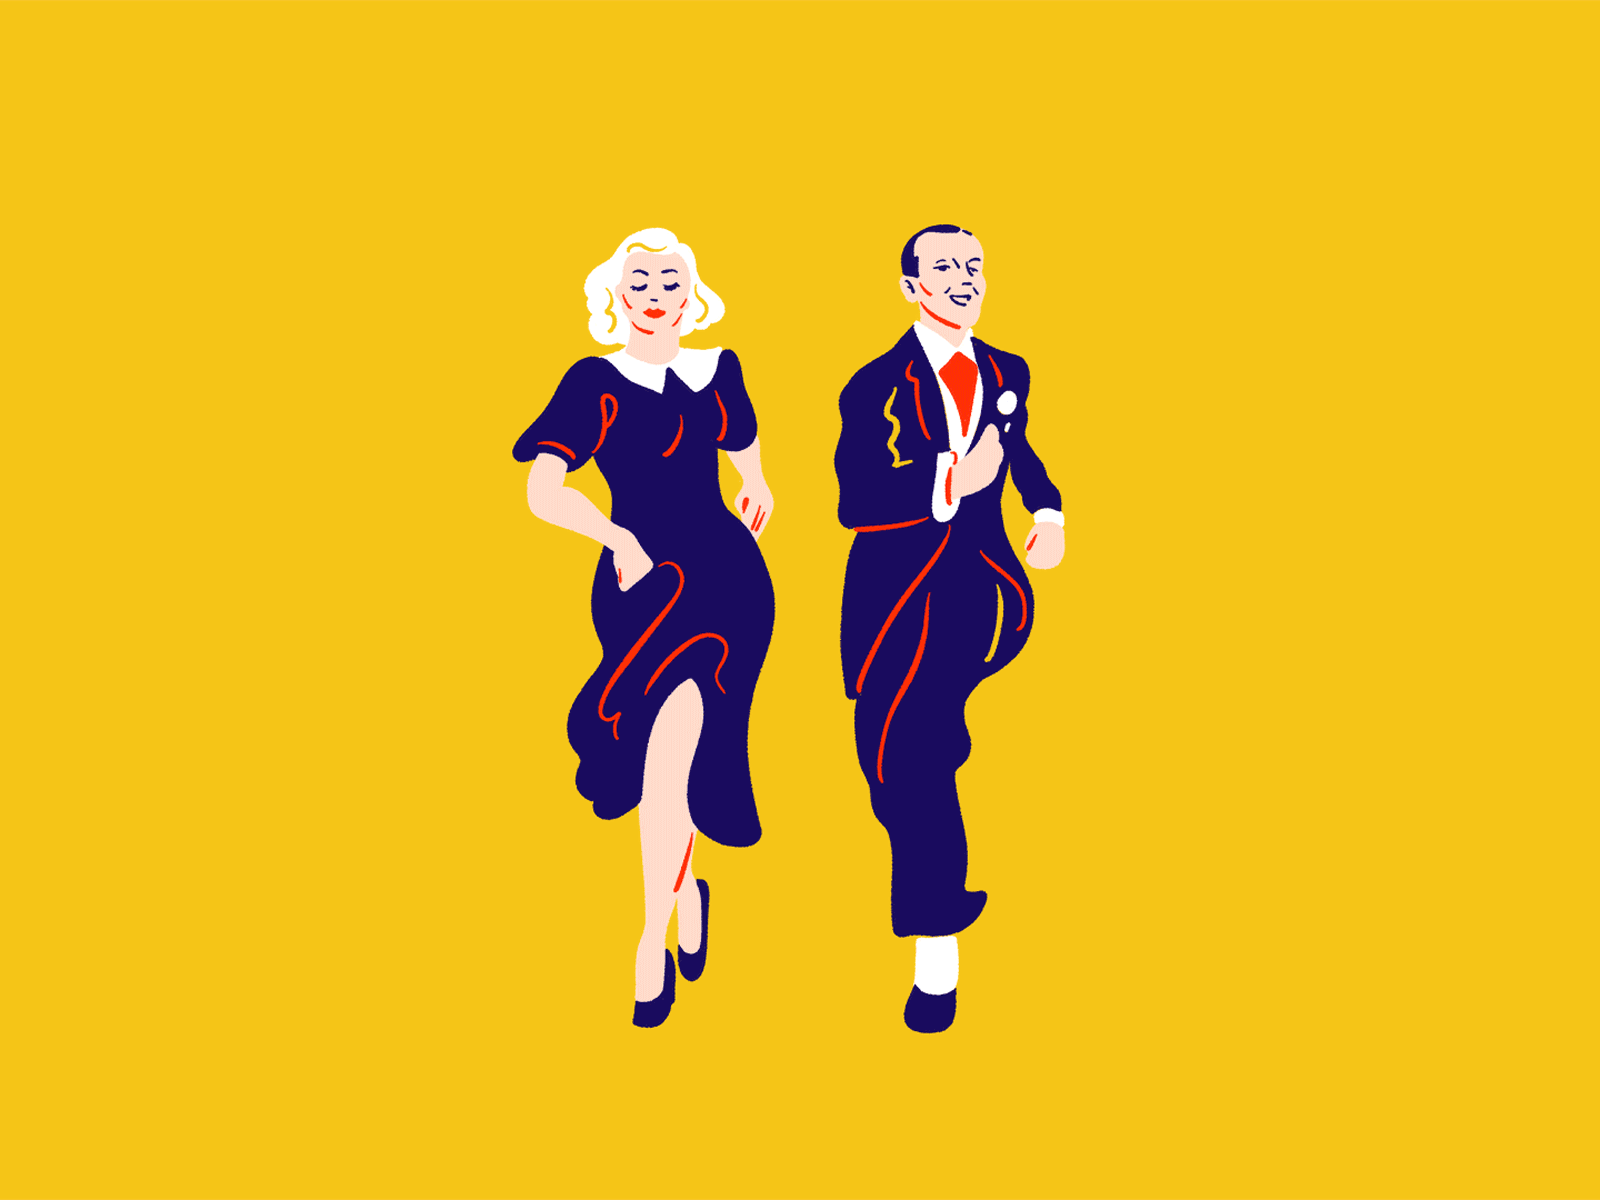 Fred Astaire & Ginger Rogers Dancing by Jordan Kay on Dribbble